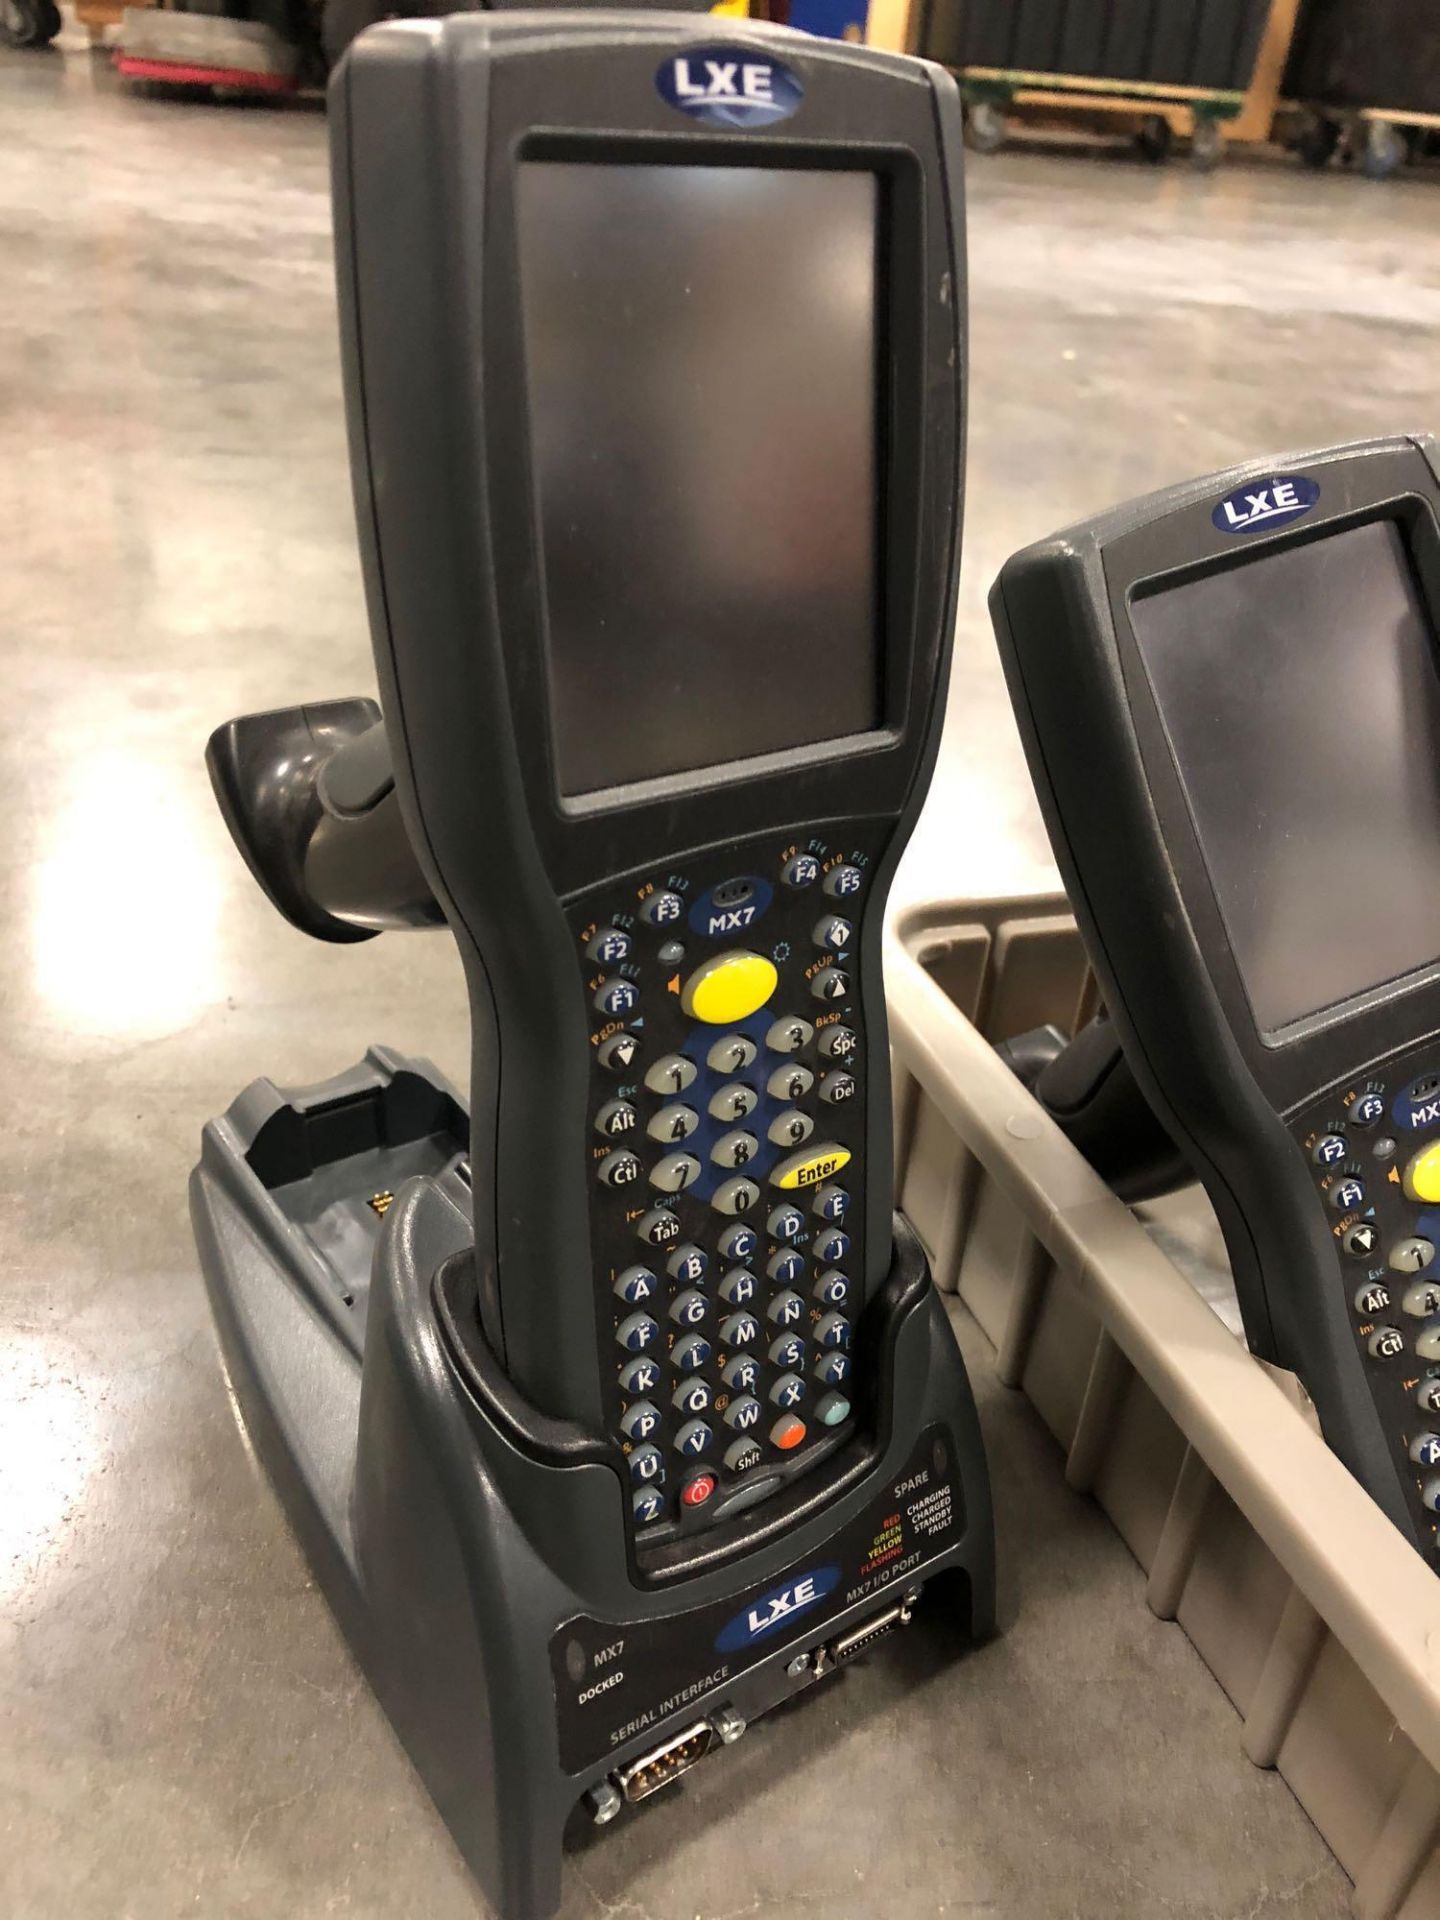 SET OF SIX LXE SCANNERS MODEL MX7 ONE WITH BASE - Image 2 of 4